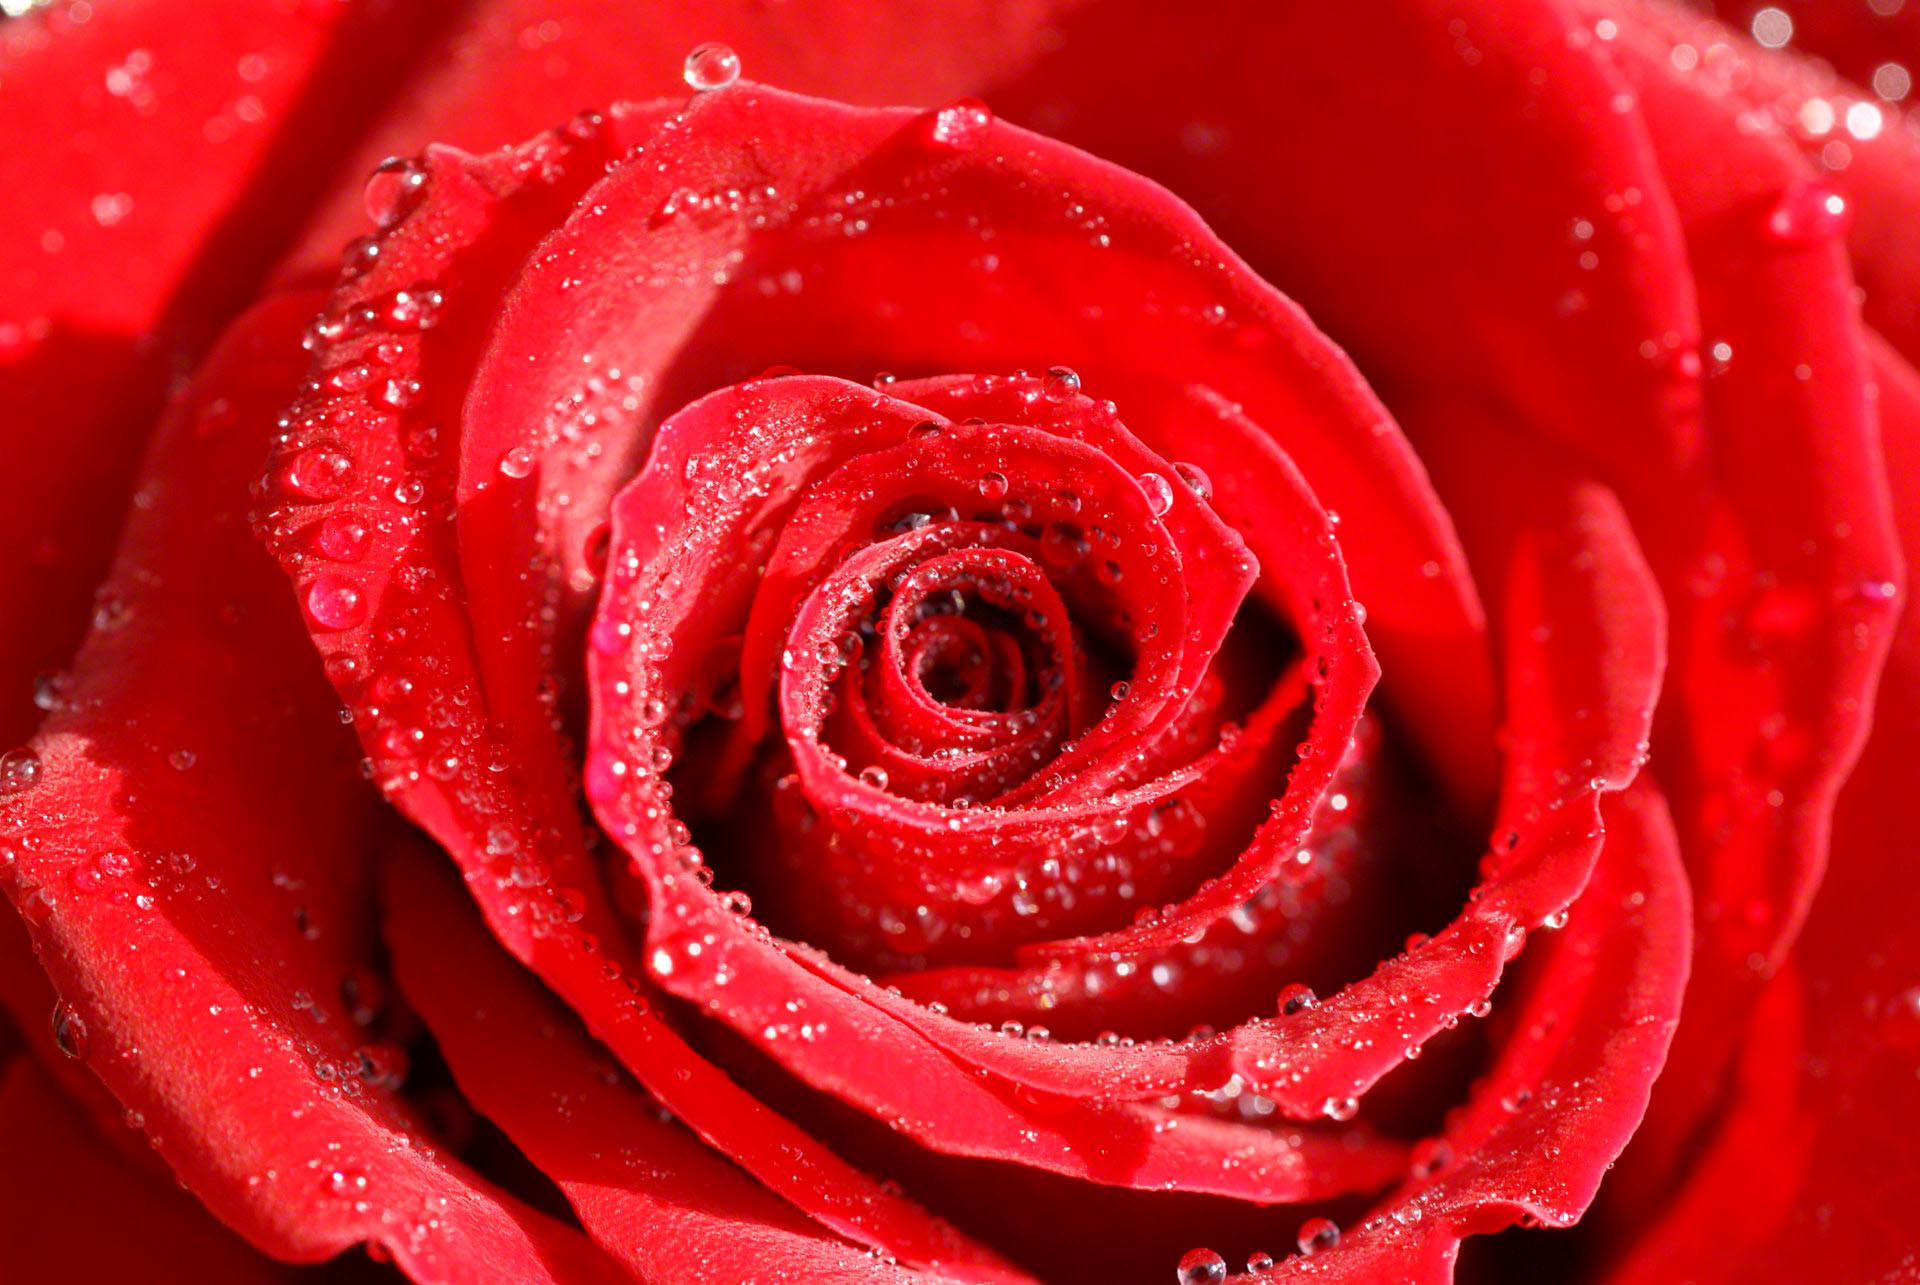 1920x1285 Rose Flowers Wallpaper For Desktop Full Hd Pics Backgrounds Roses Flower  Photos Your Red Of Laptop